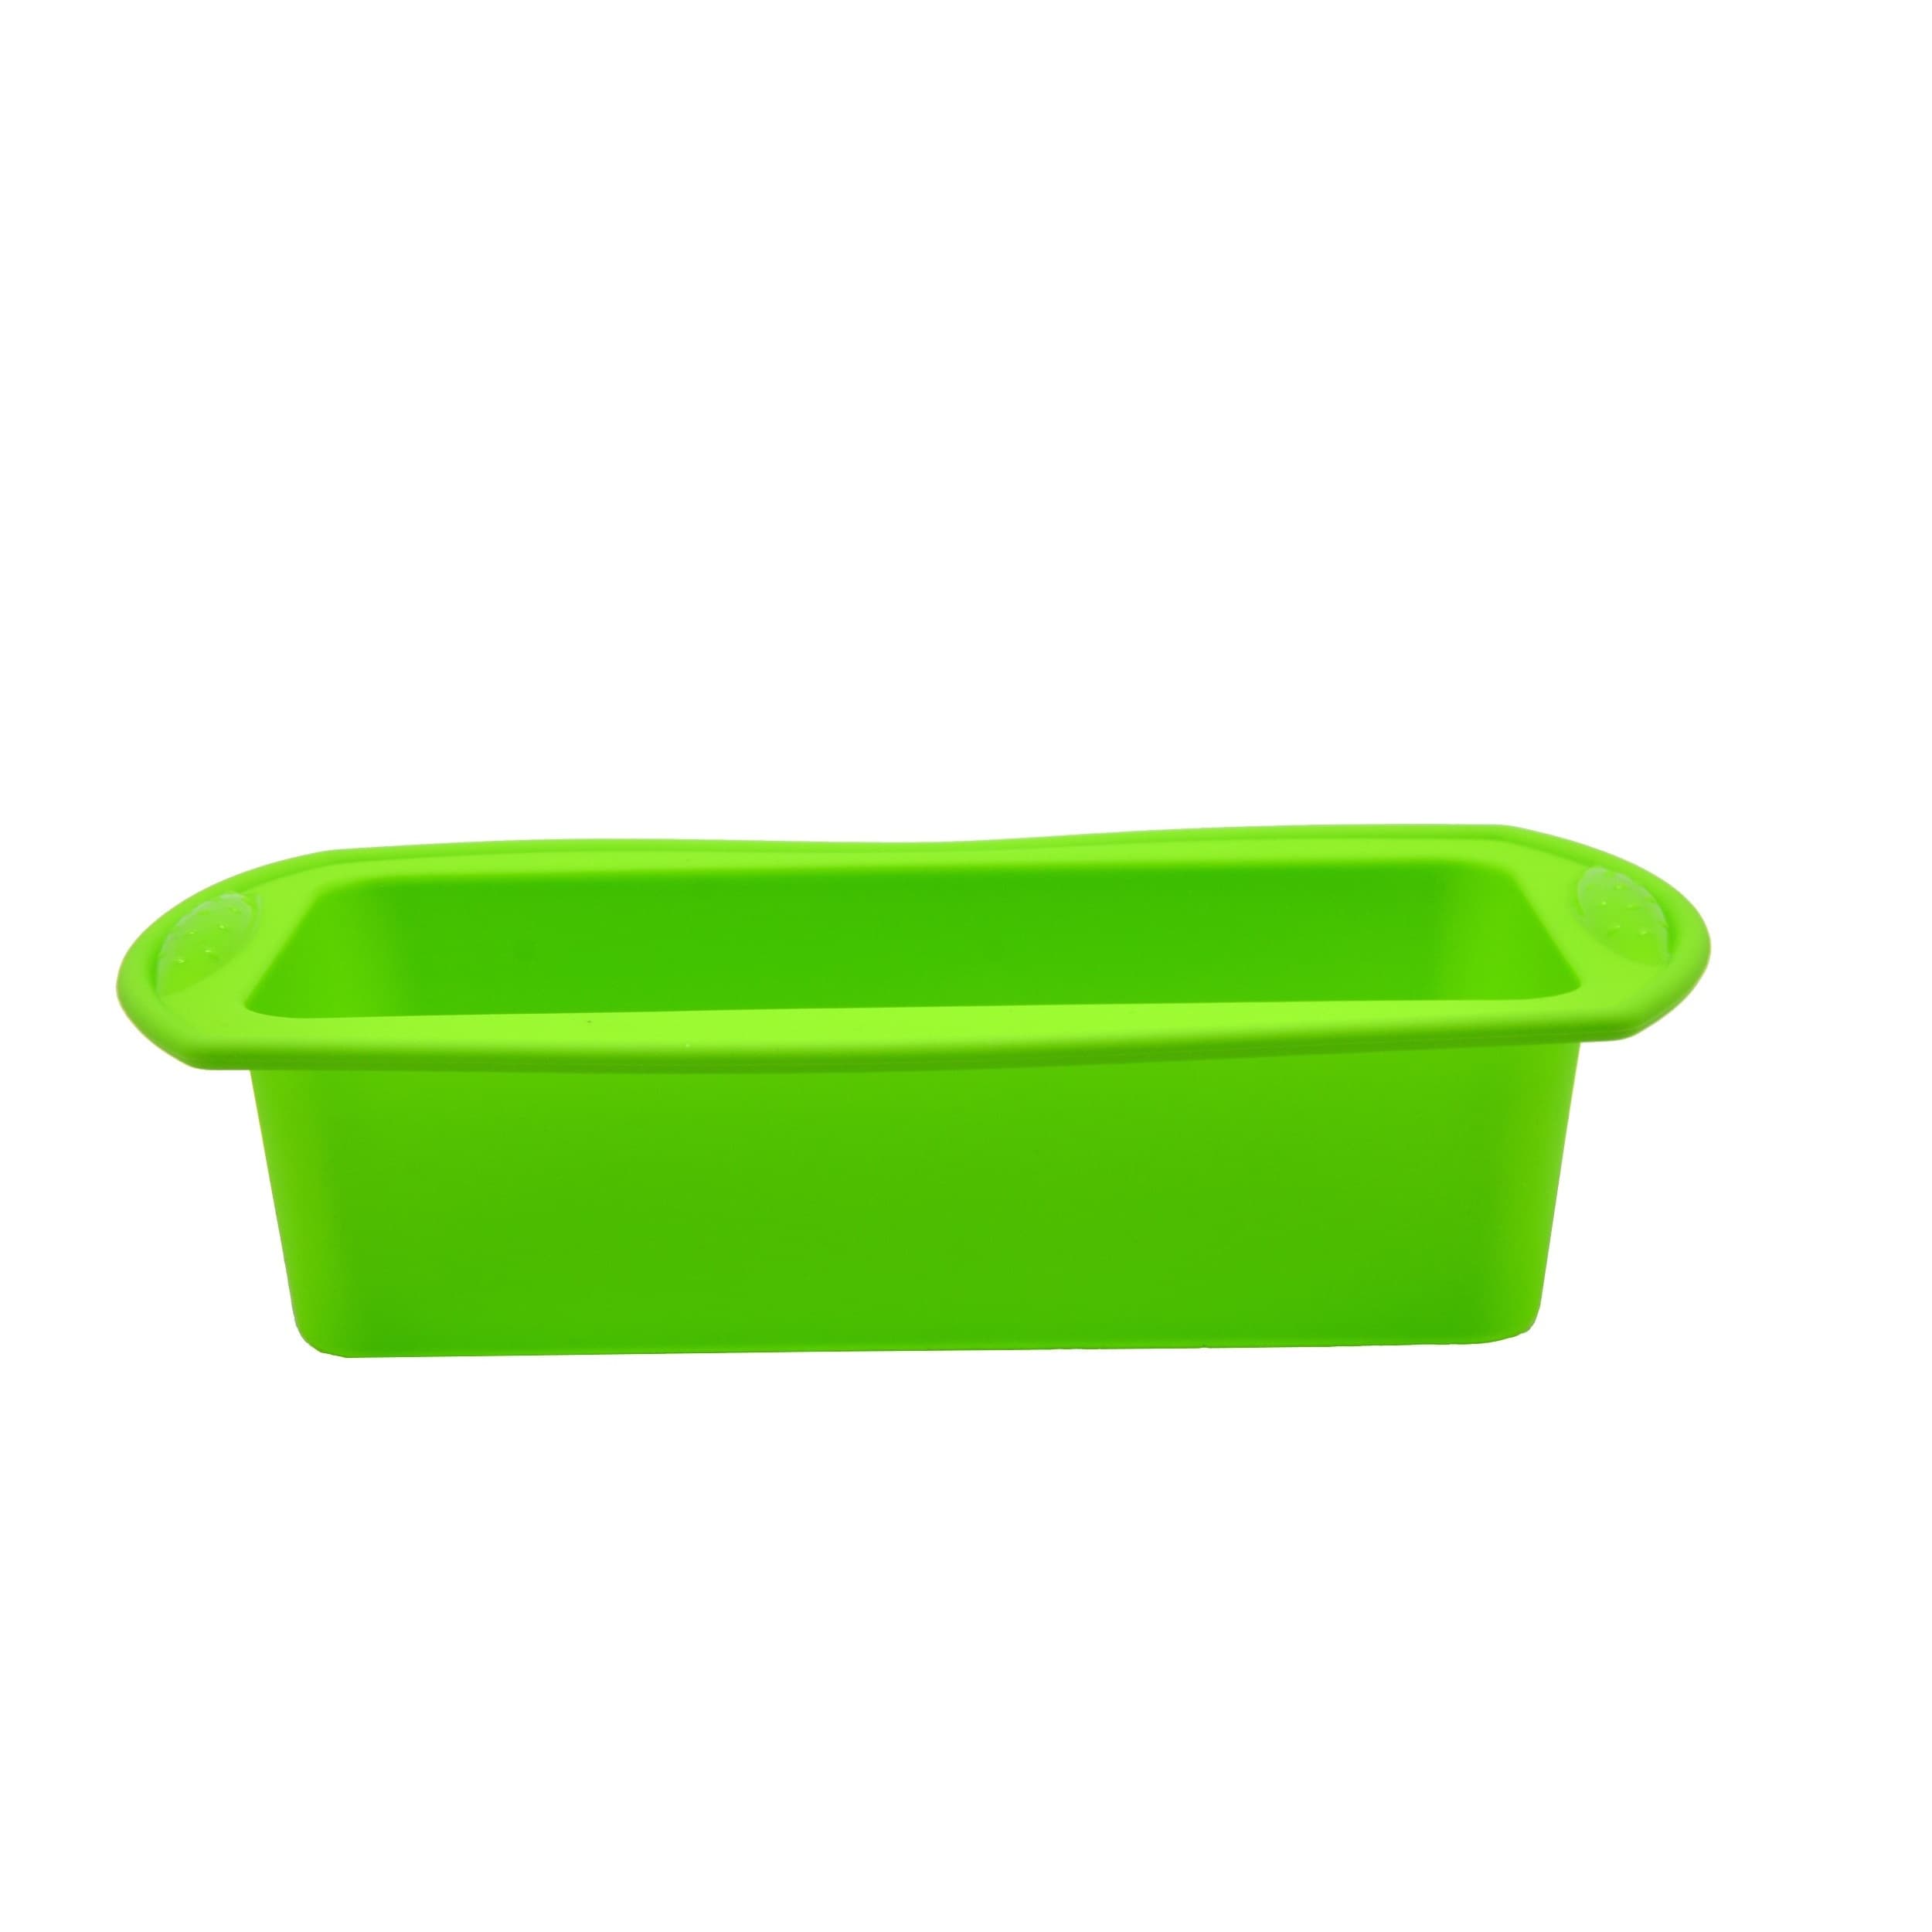 https://ak1.ostkcdn.com/images/products/12635773/Prime-Cook-Silicone-Rectangular-Cake-Loaf-Pan-b2e14f8f-5dc0-4250-94de-0e38dc2be627.jpg